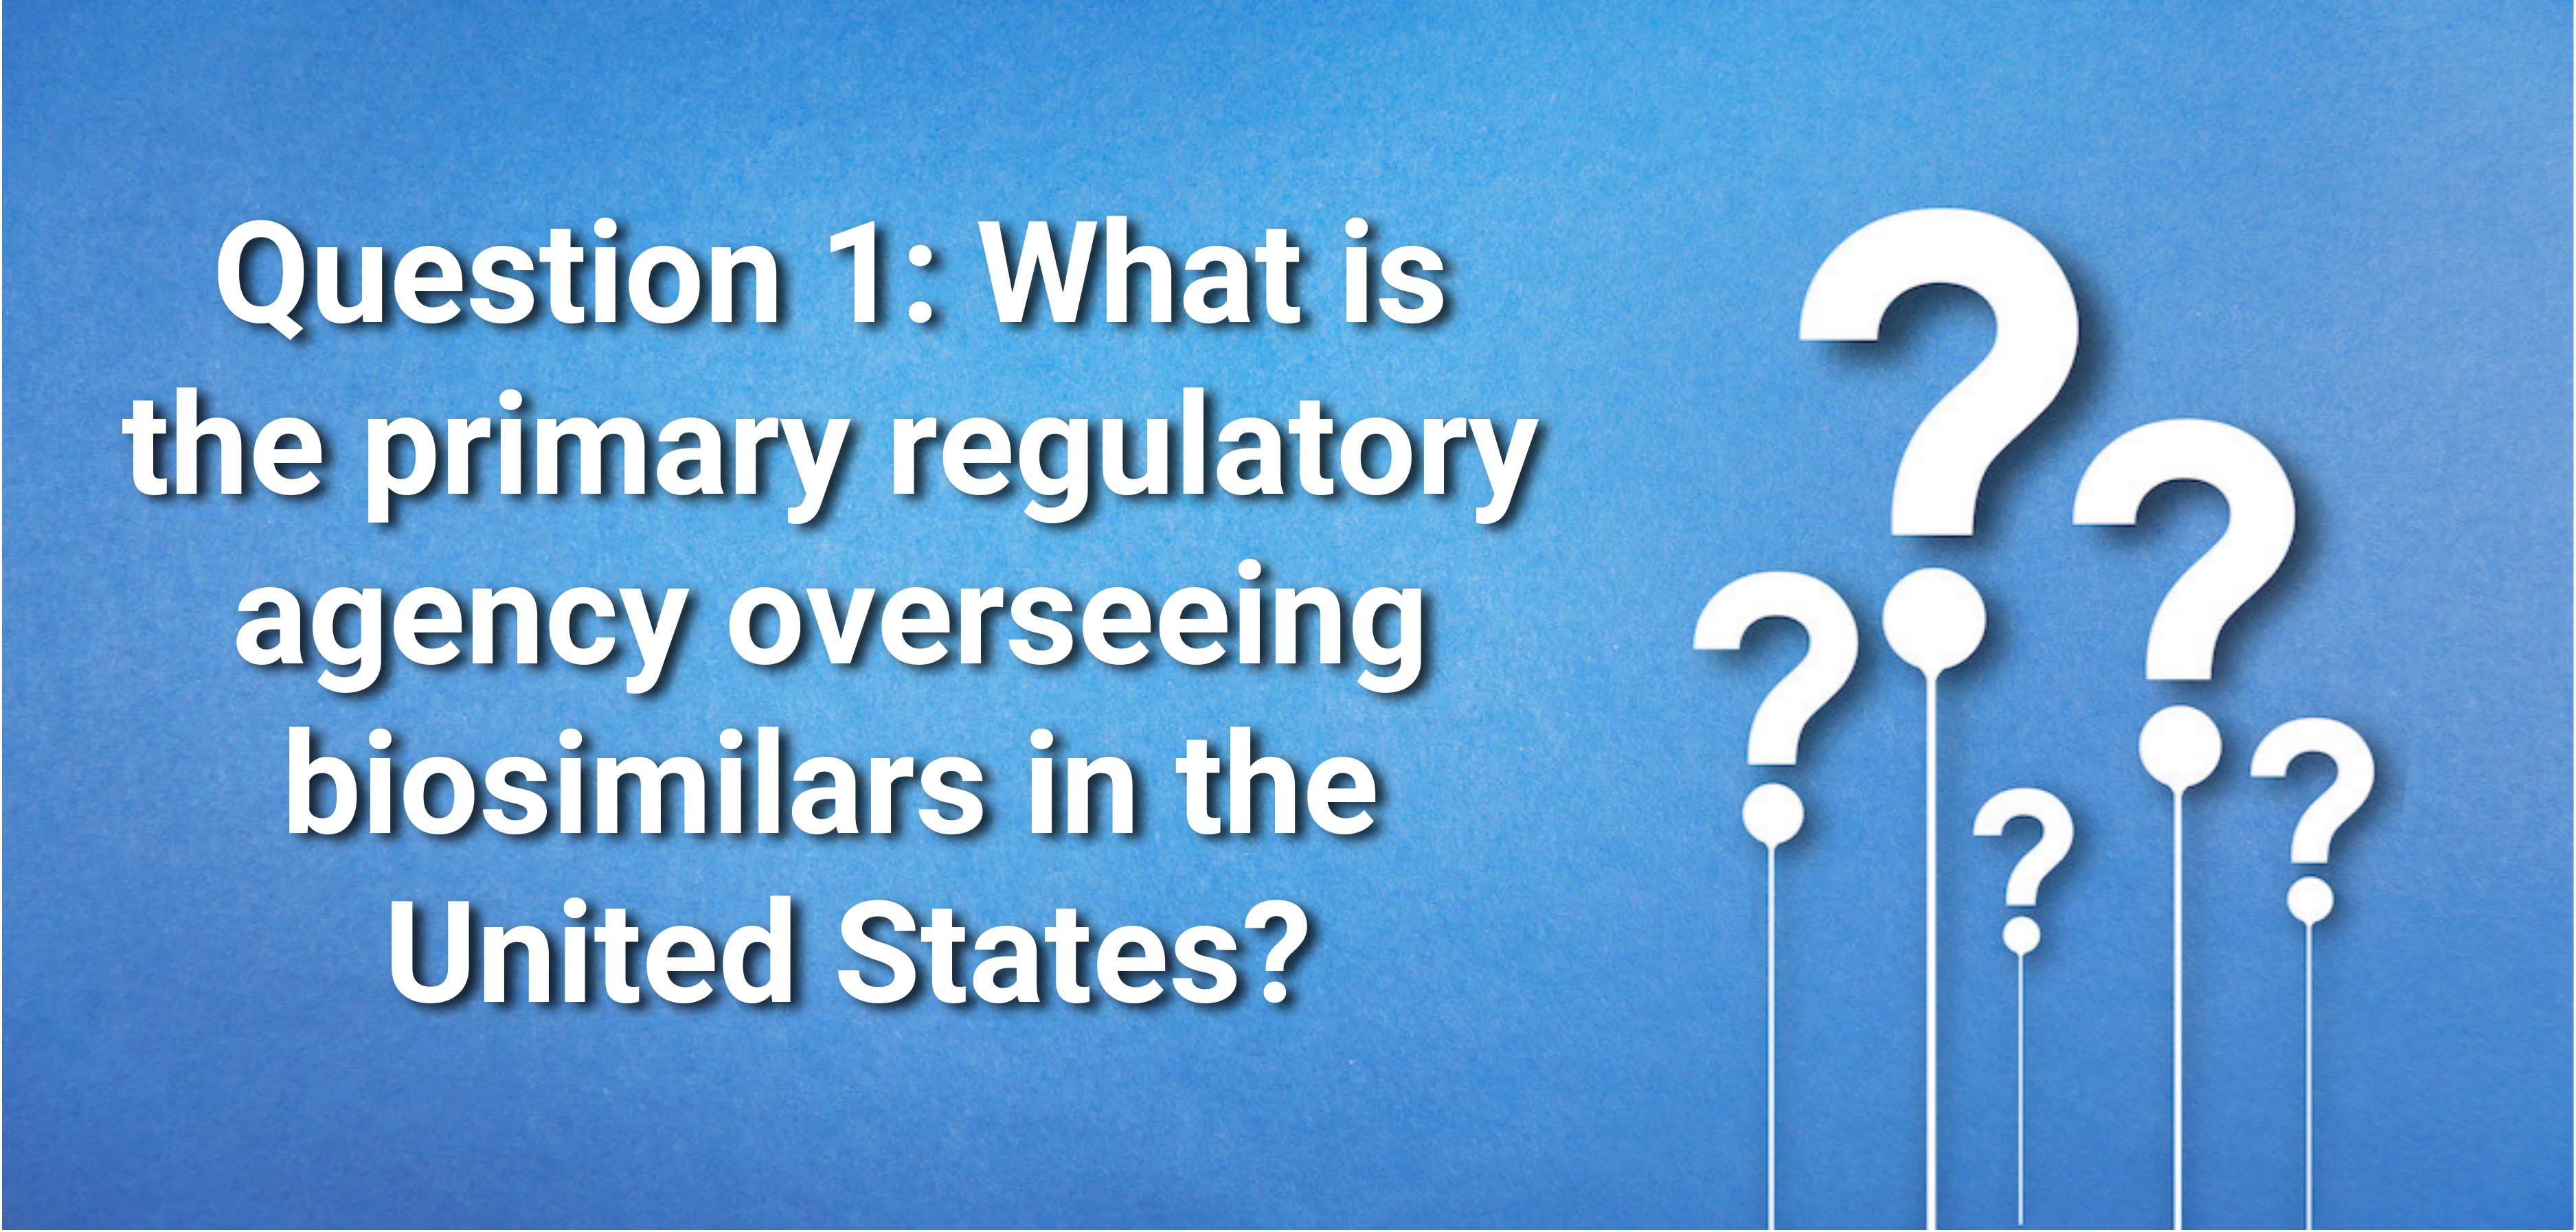 Question 1: What is the primary regulatory agency overseeing biosimilars in the United States?